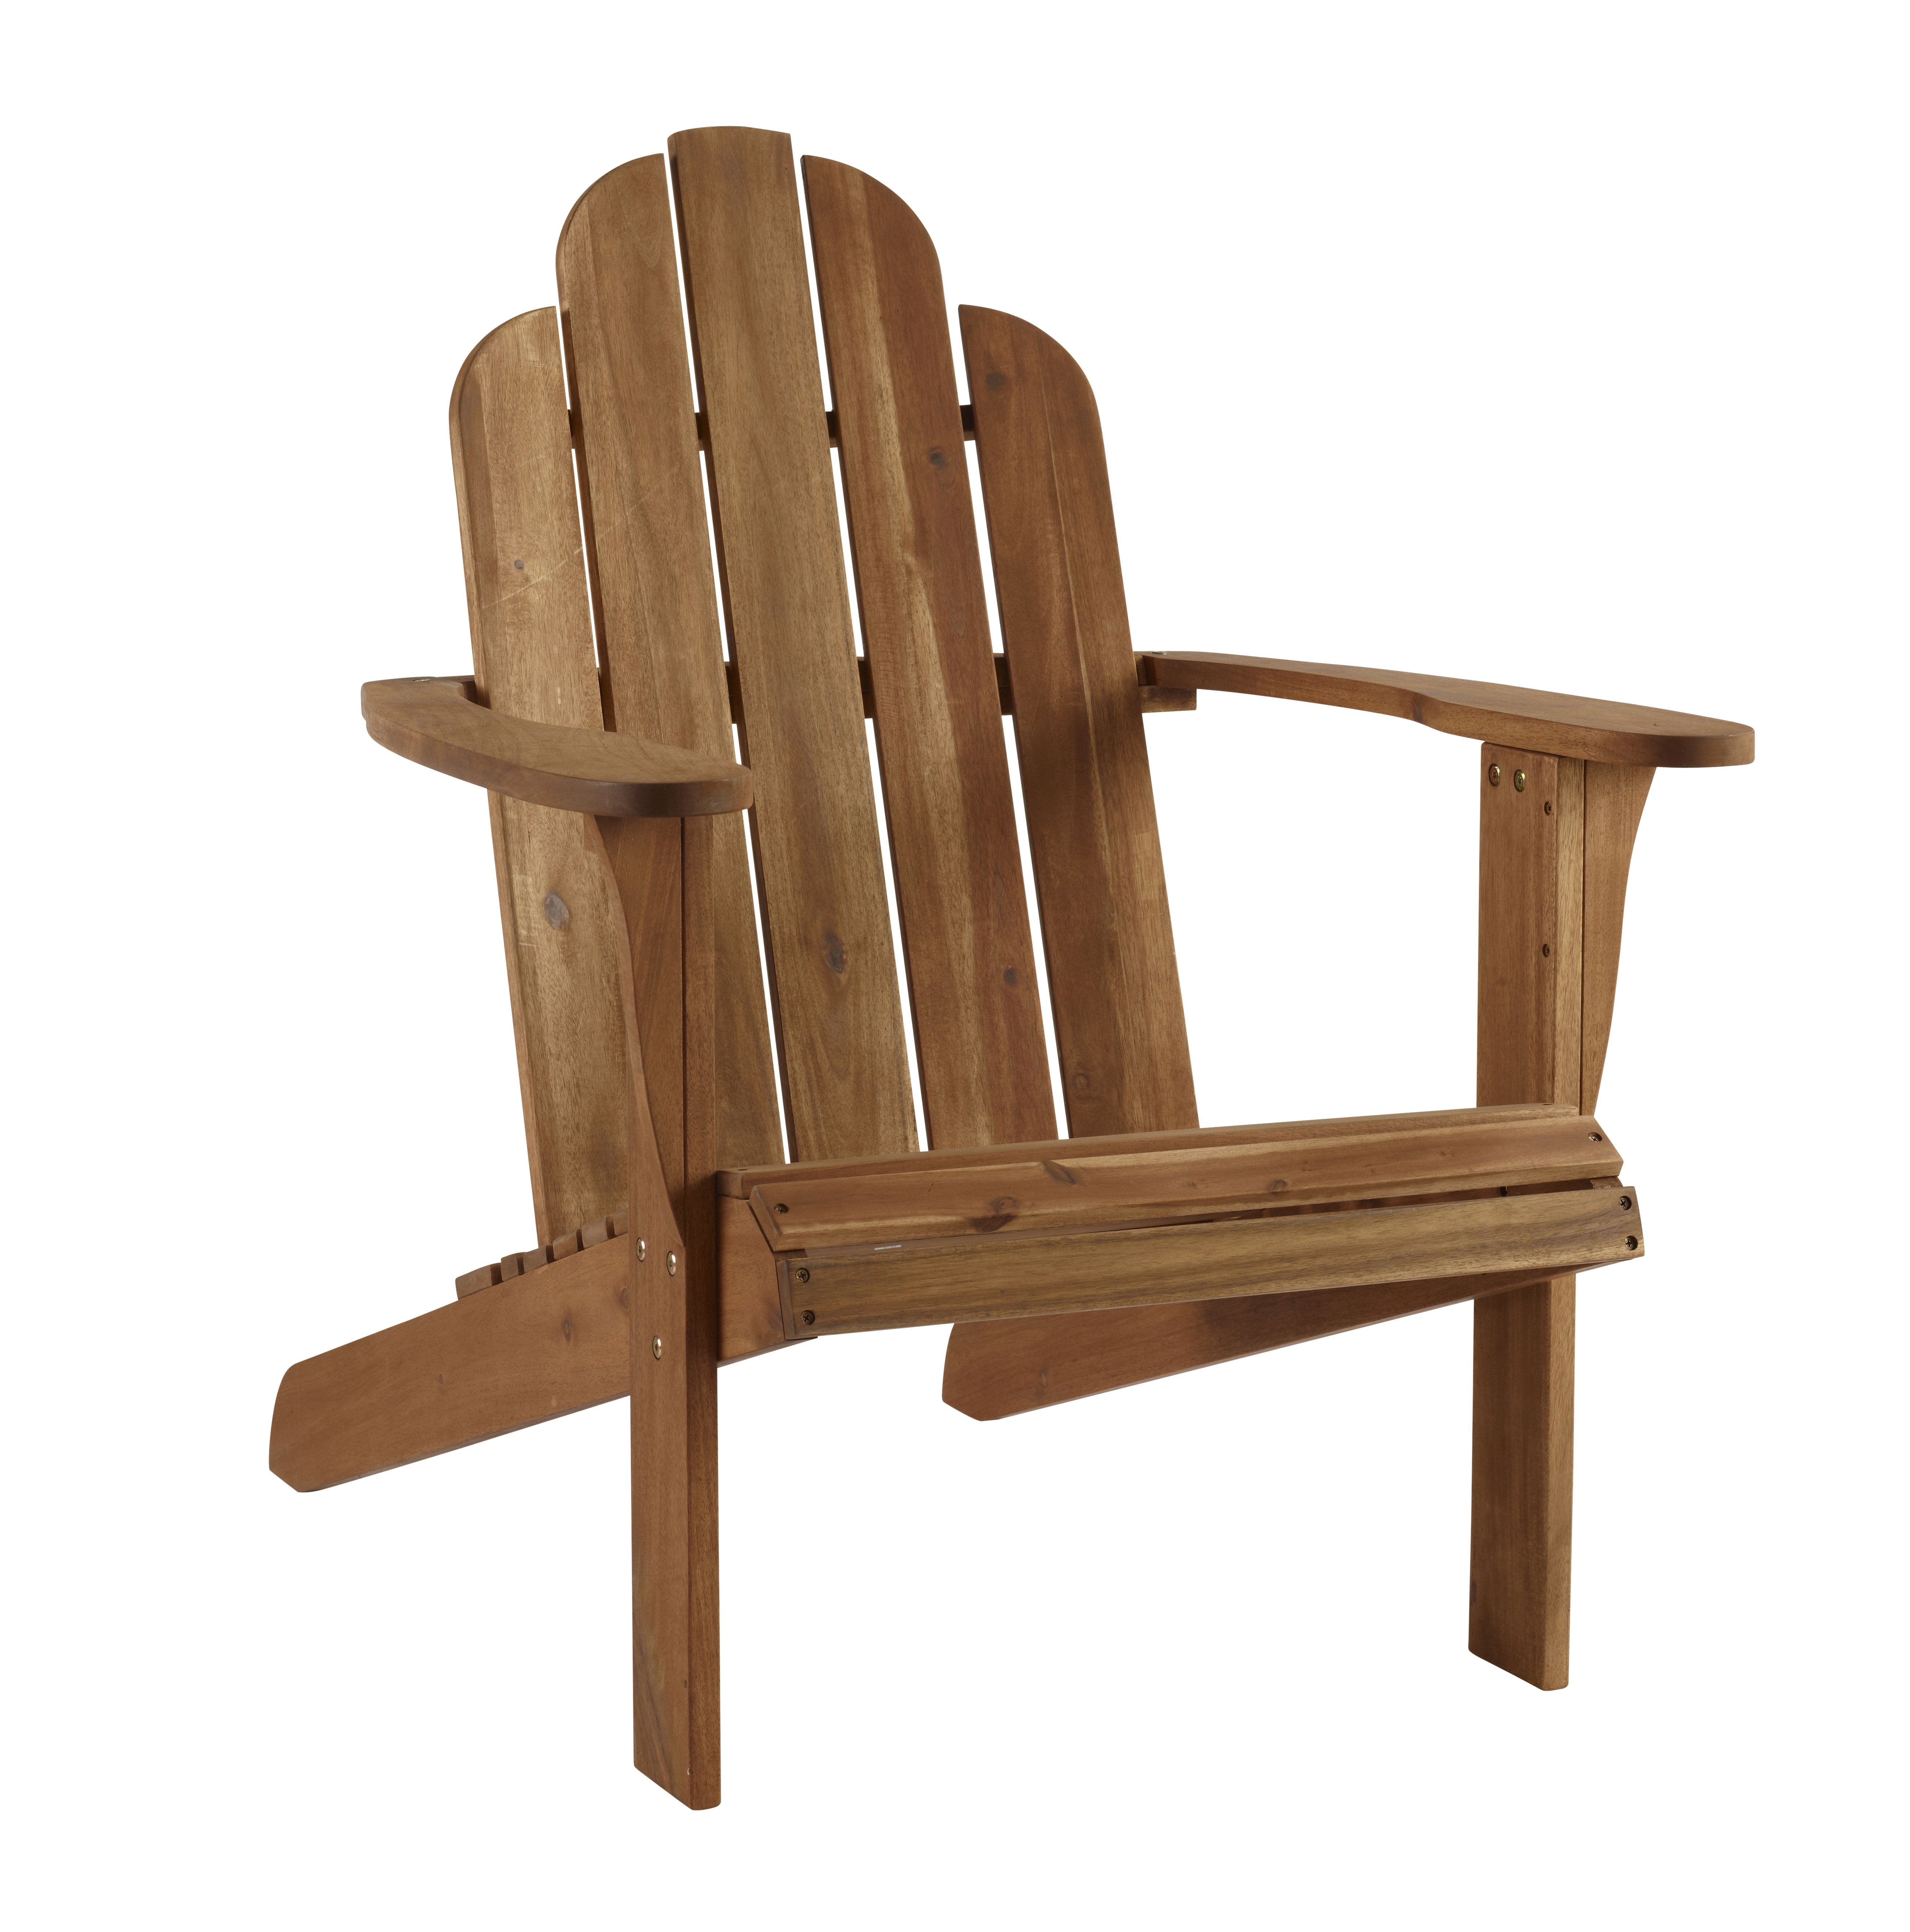 Beachcrest Home Knowlson Solid Wood Adirondack Chair Reviews